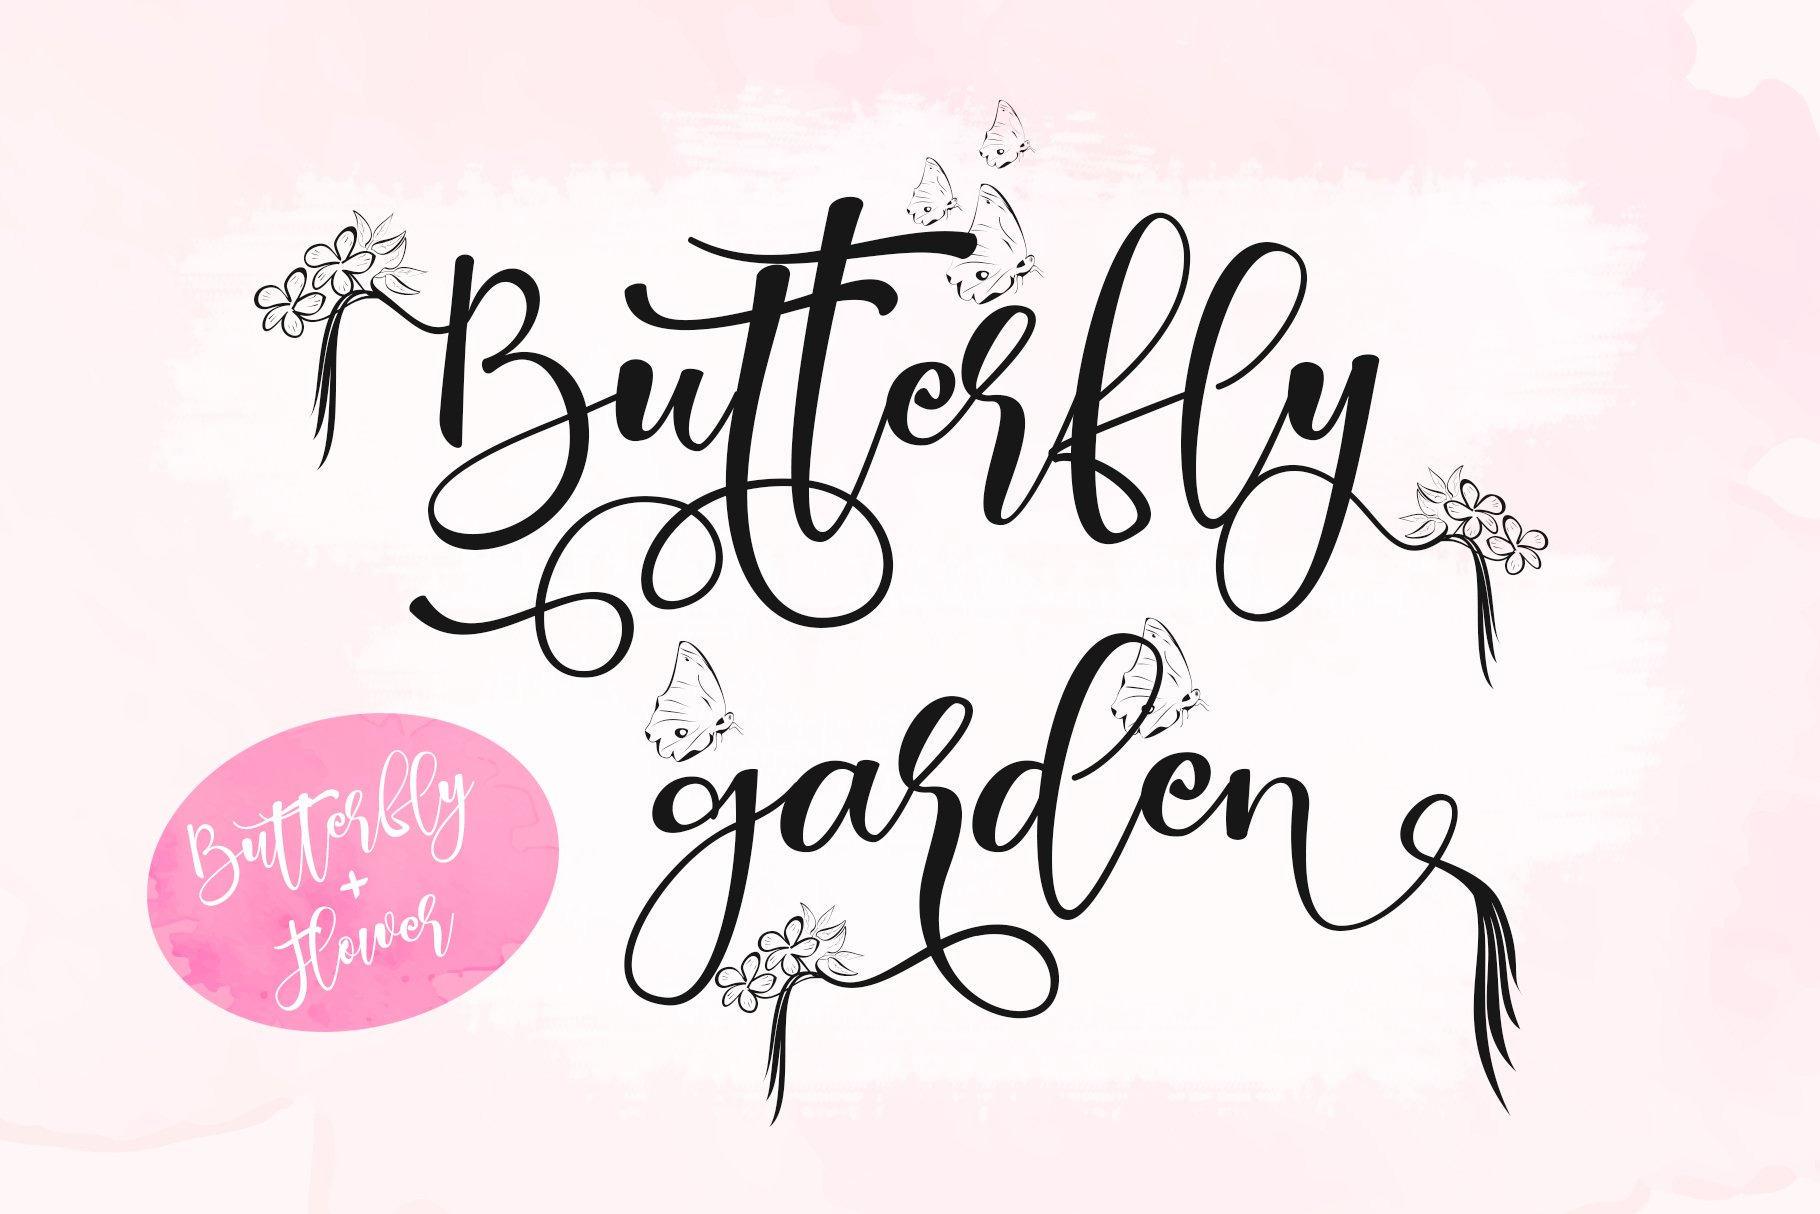 Butterfly Garden cover image.